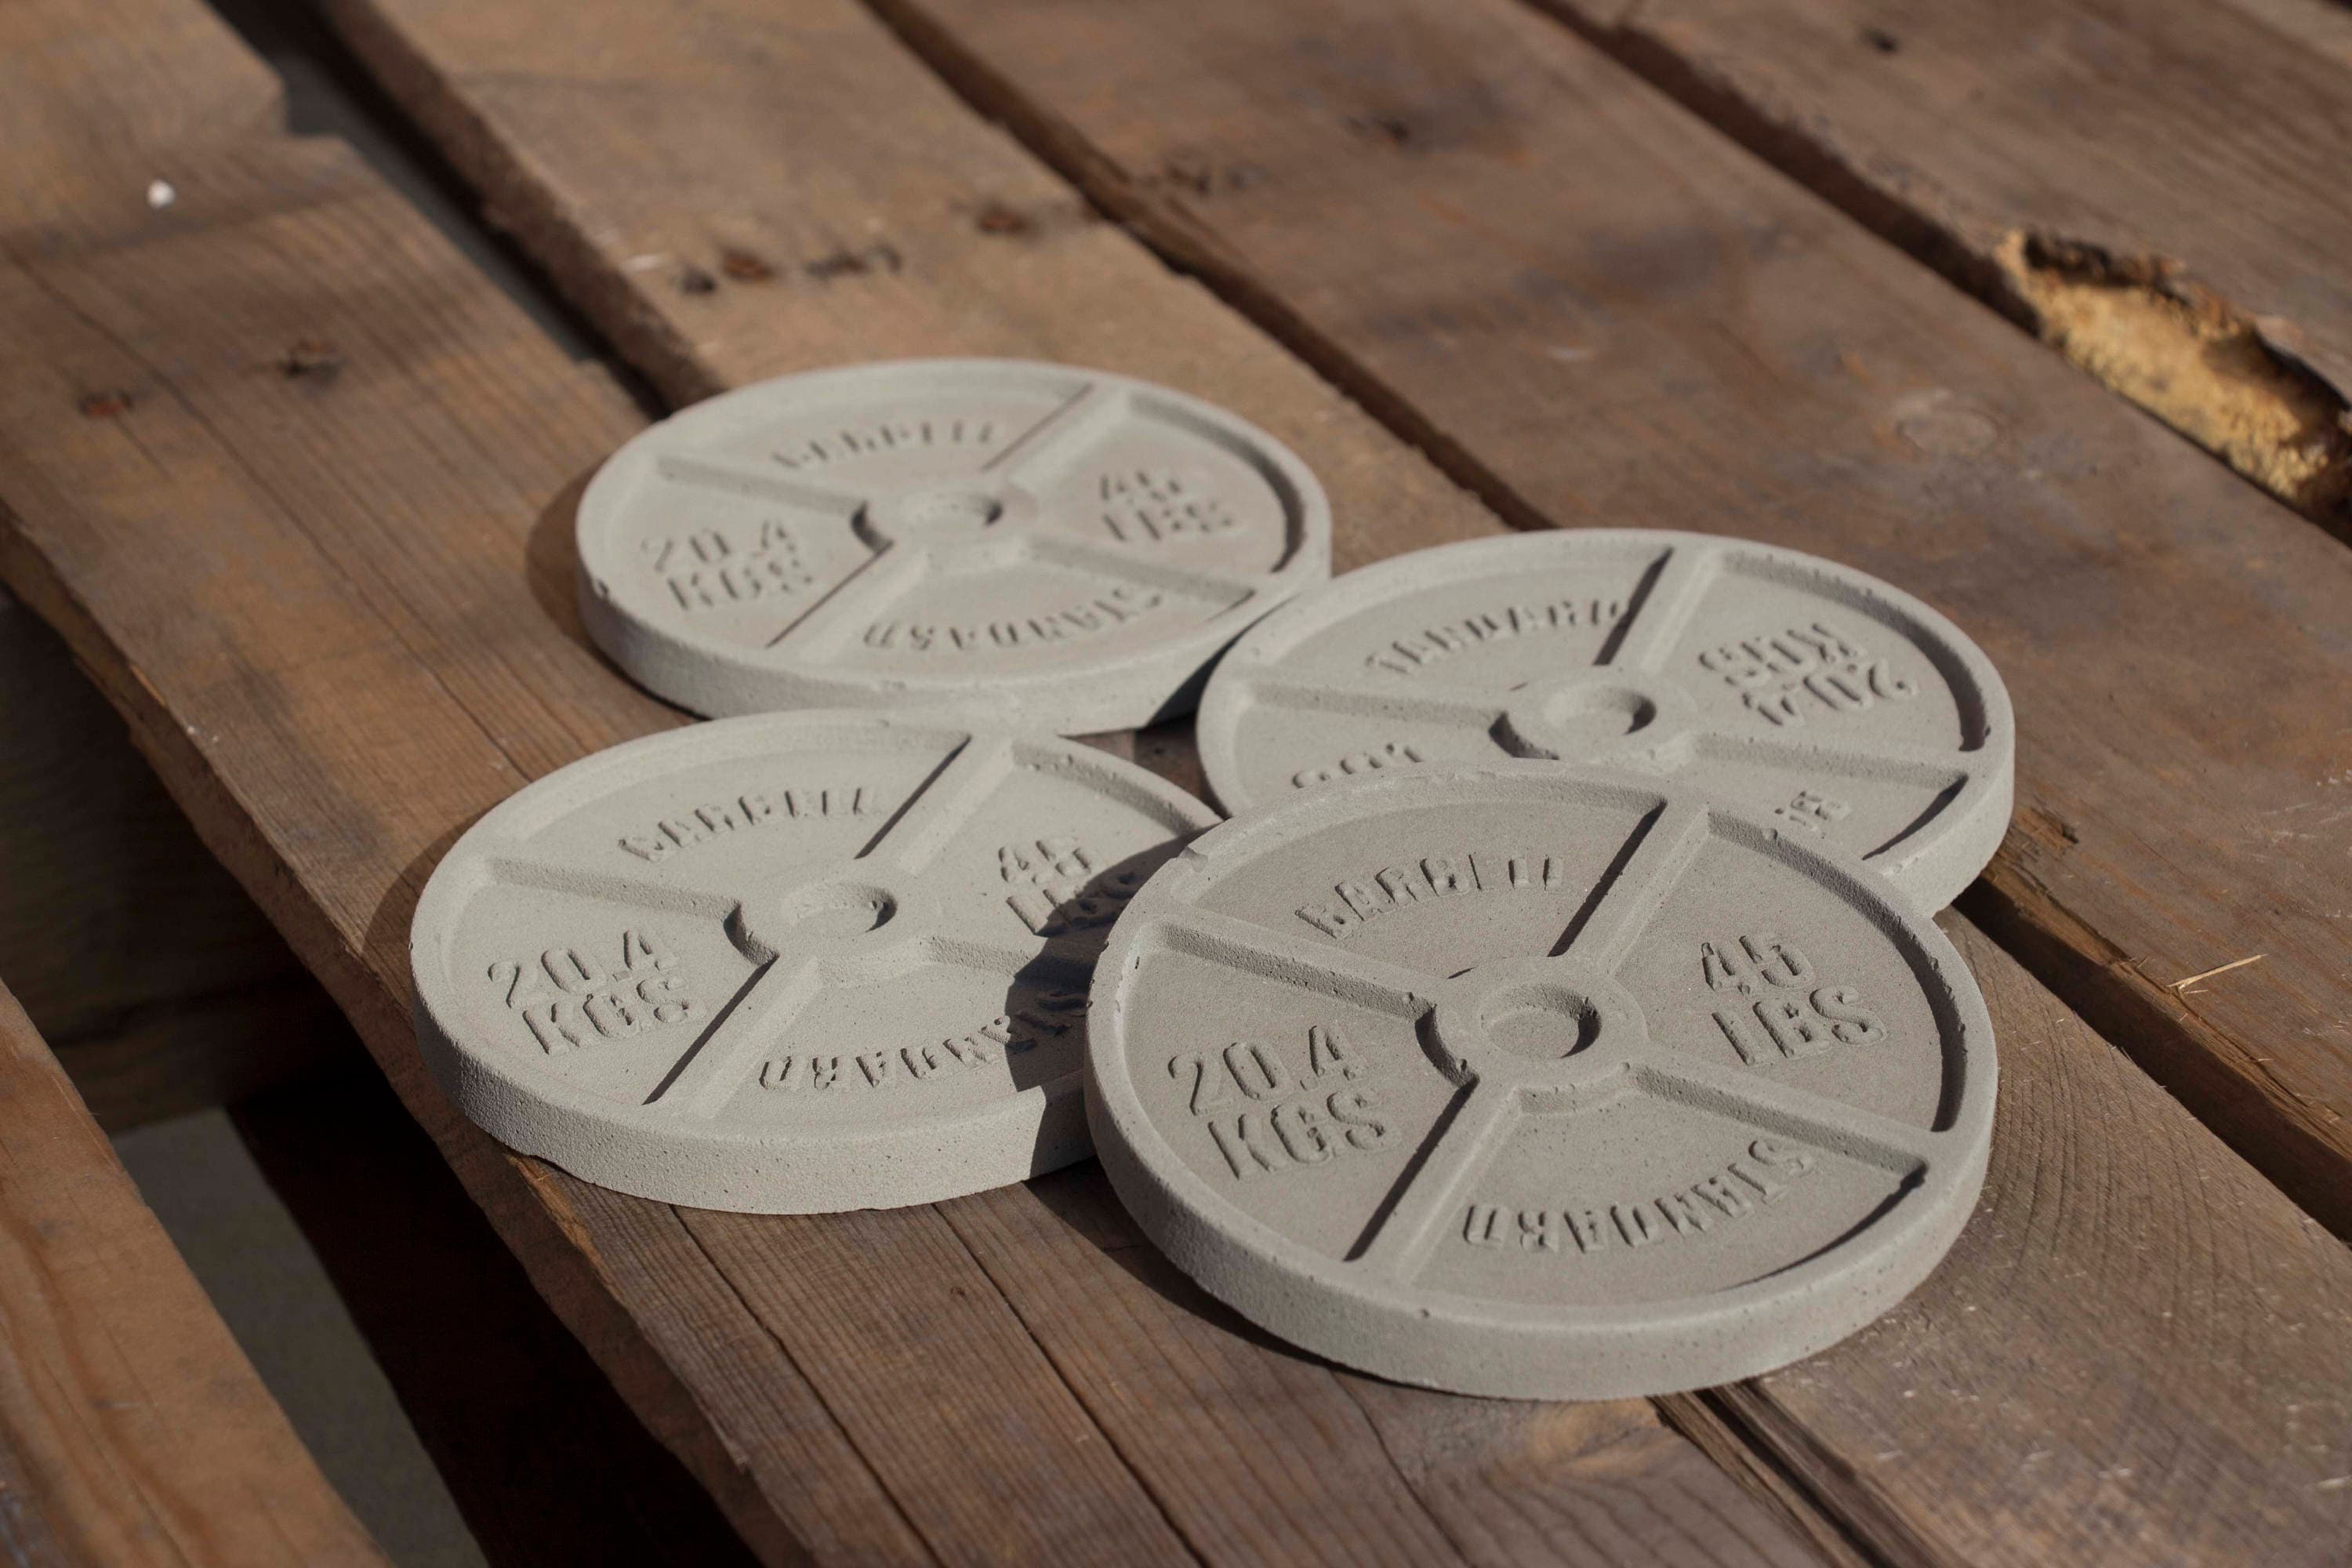 Concrete Barbell Workout Coaster 4 Pack / Workout Coaster